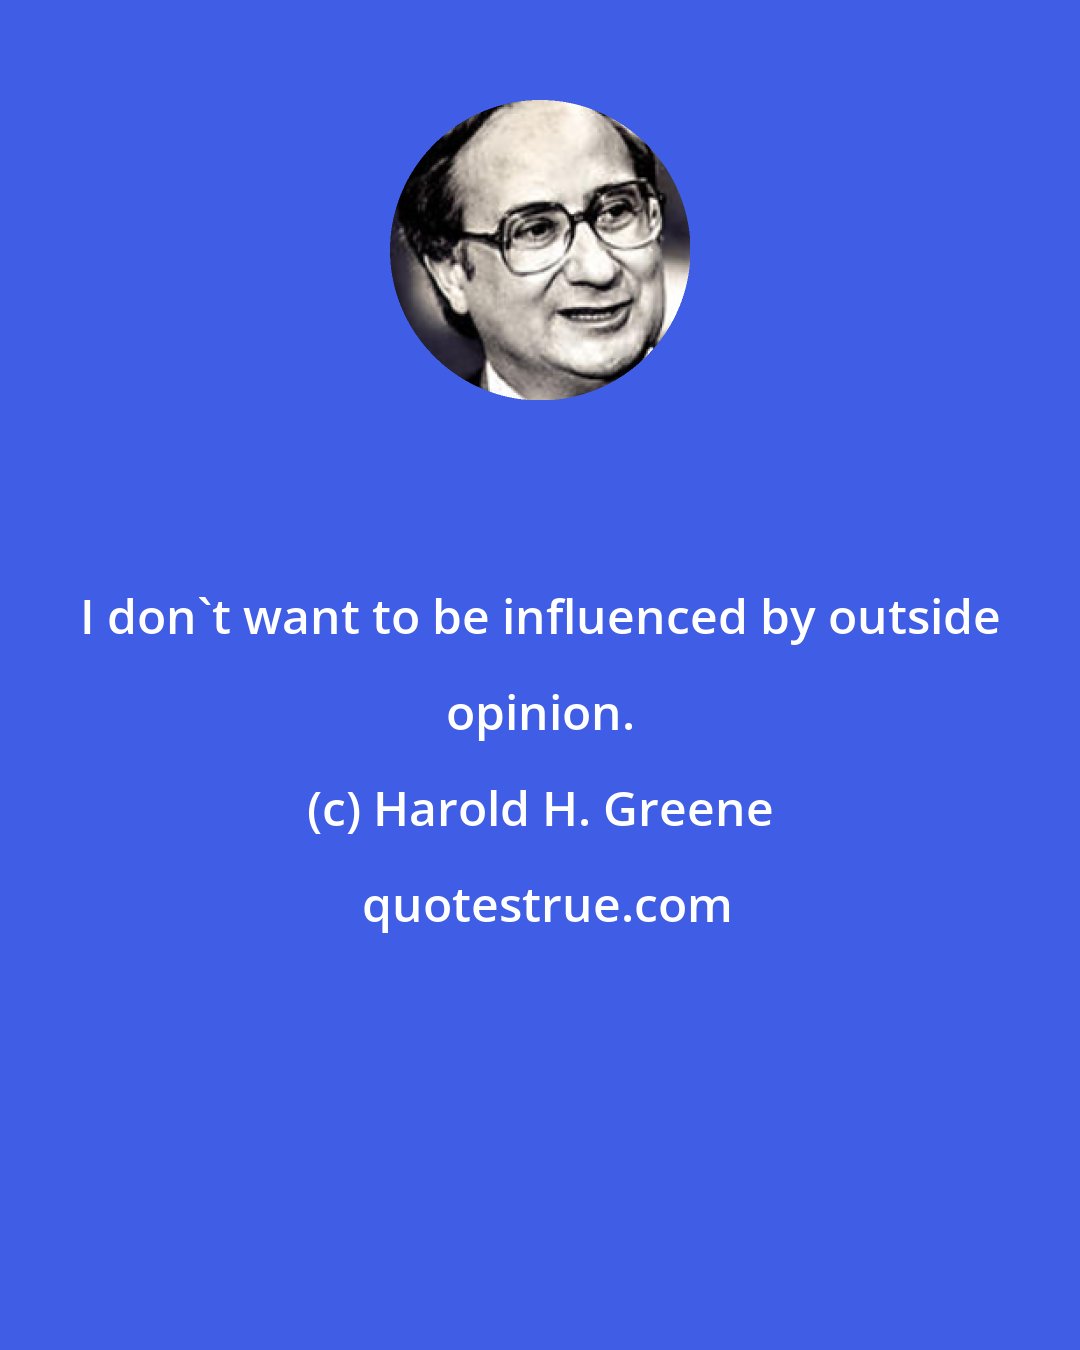 Harold H. Greene: I don't want to be influenced by outside opinion.